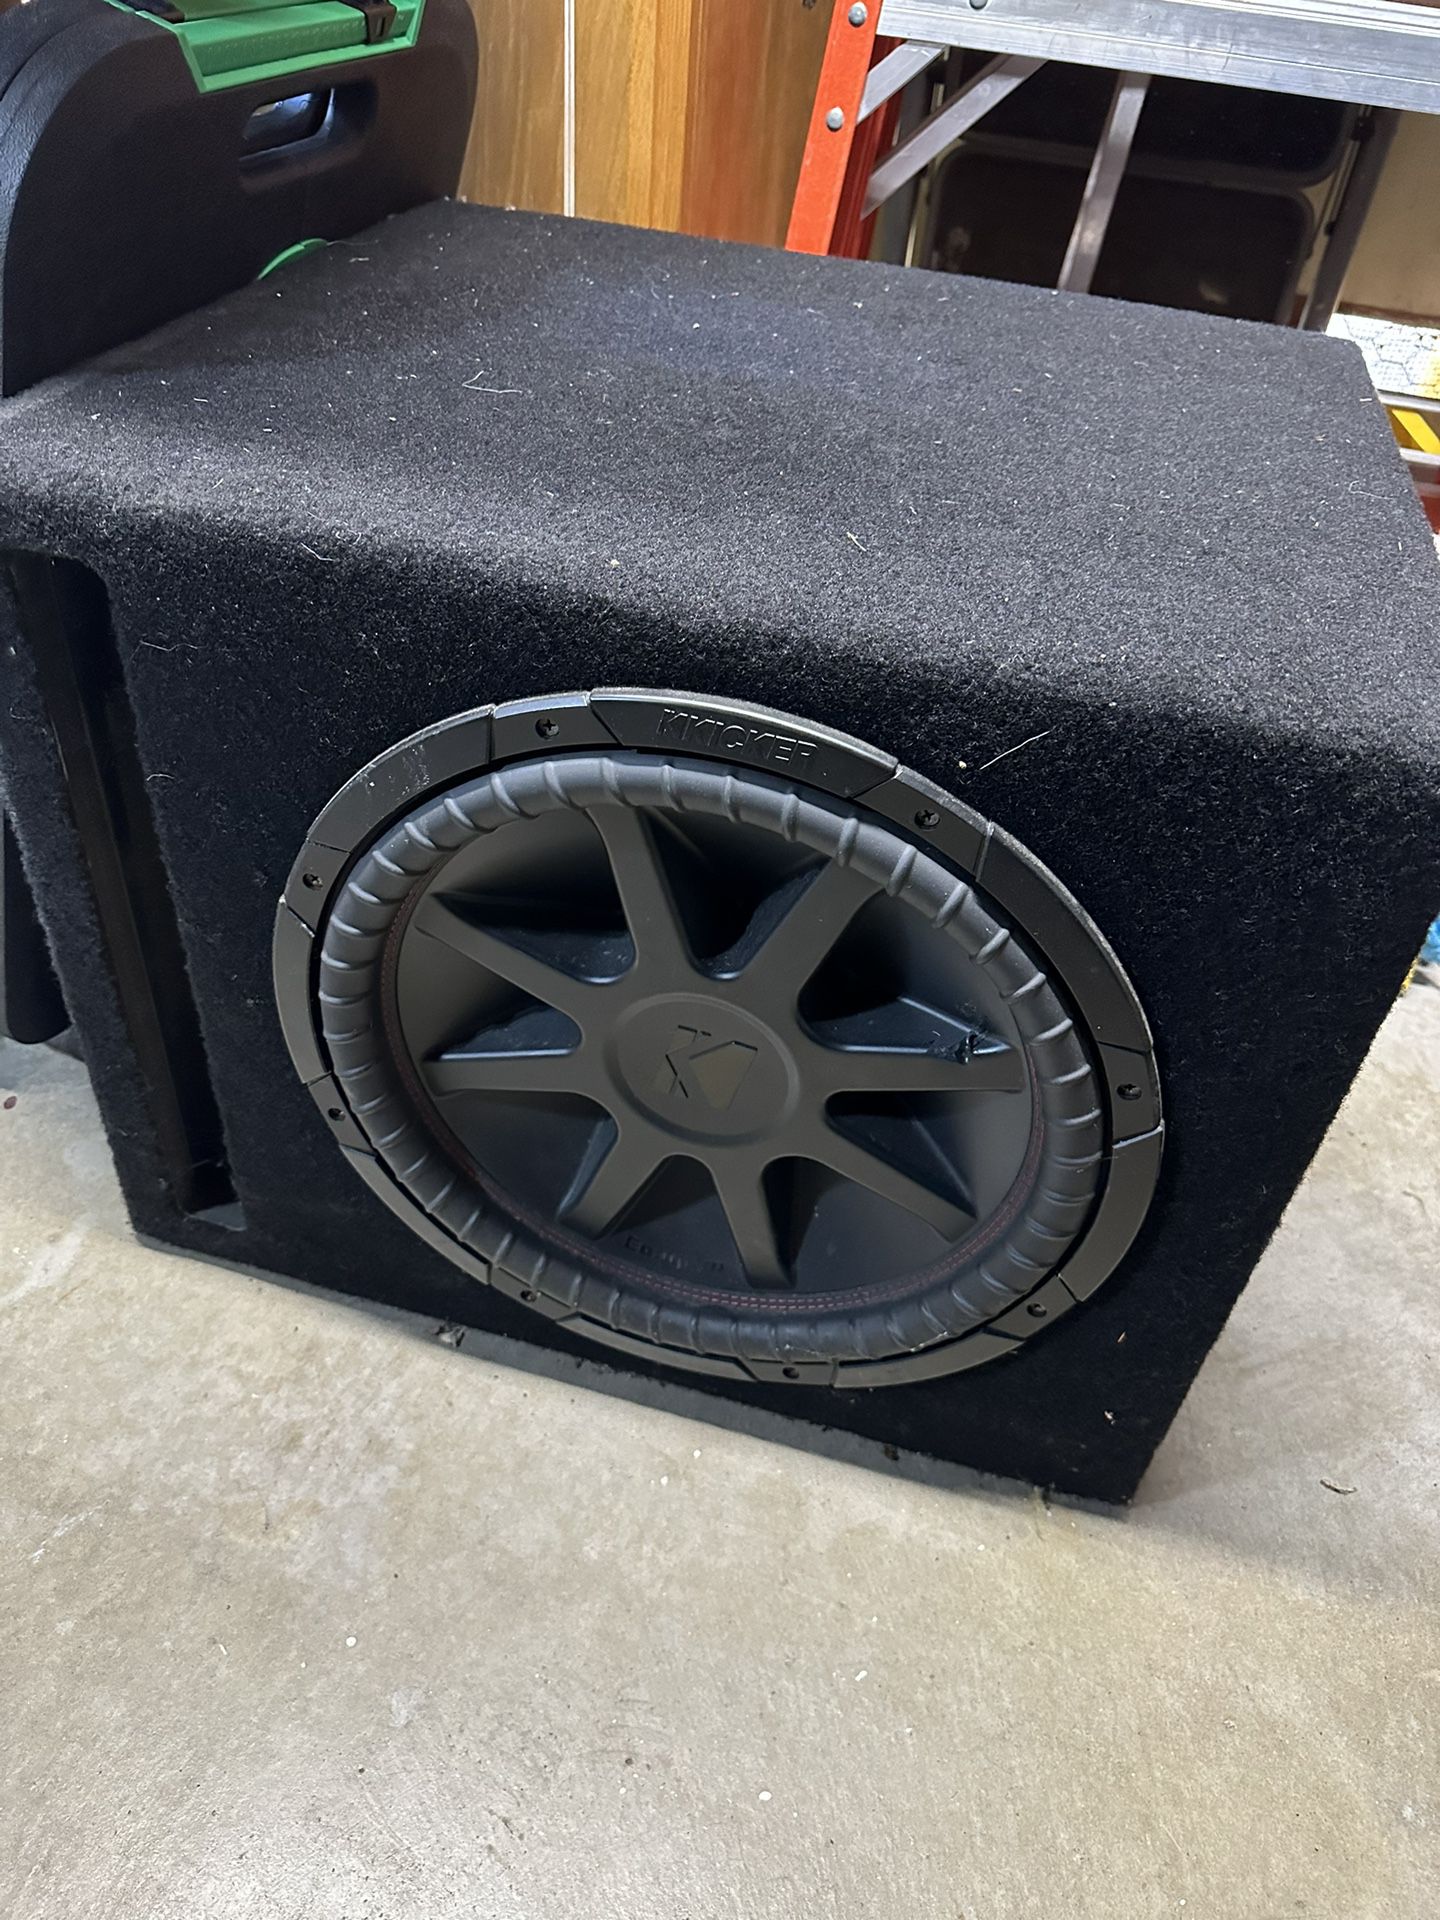 15” Kicker Subwoofer And Amp